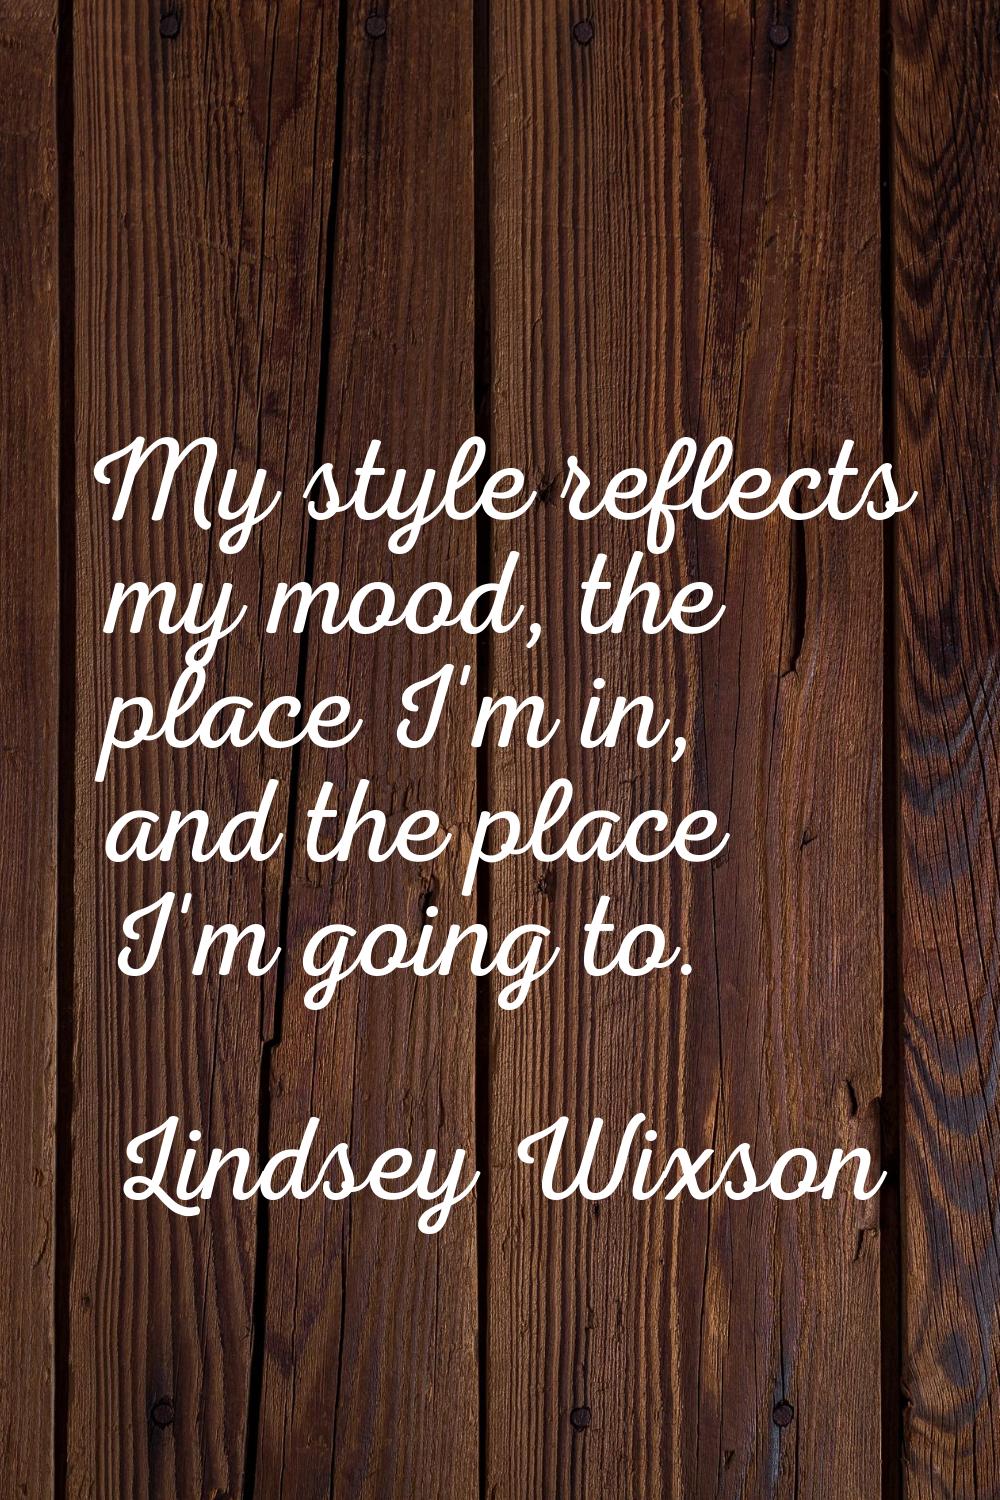 My style reflects my mood, the place I'm in, and the place I'm going to.